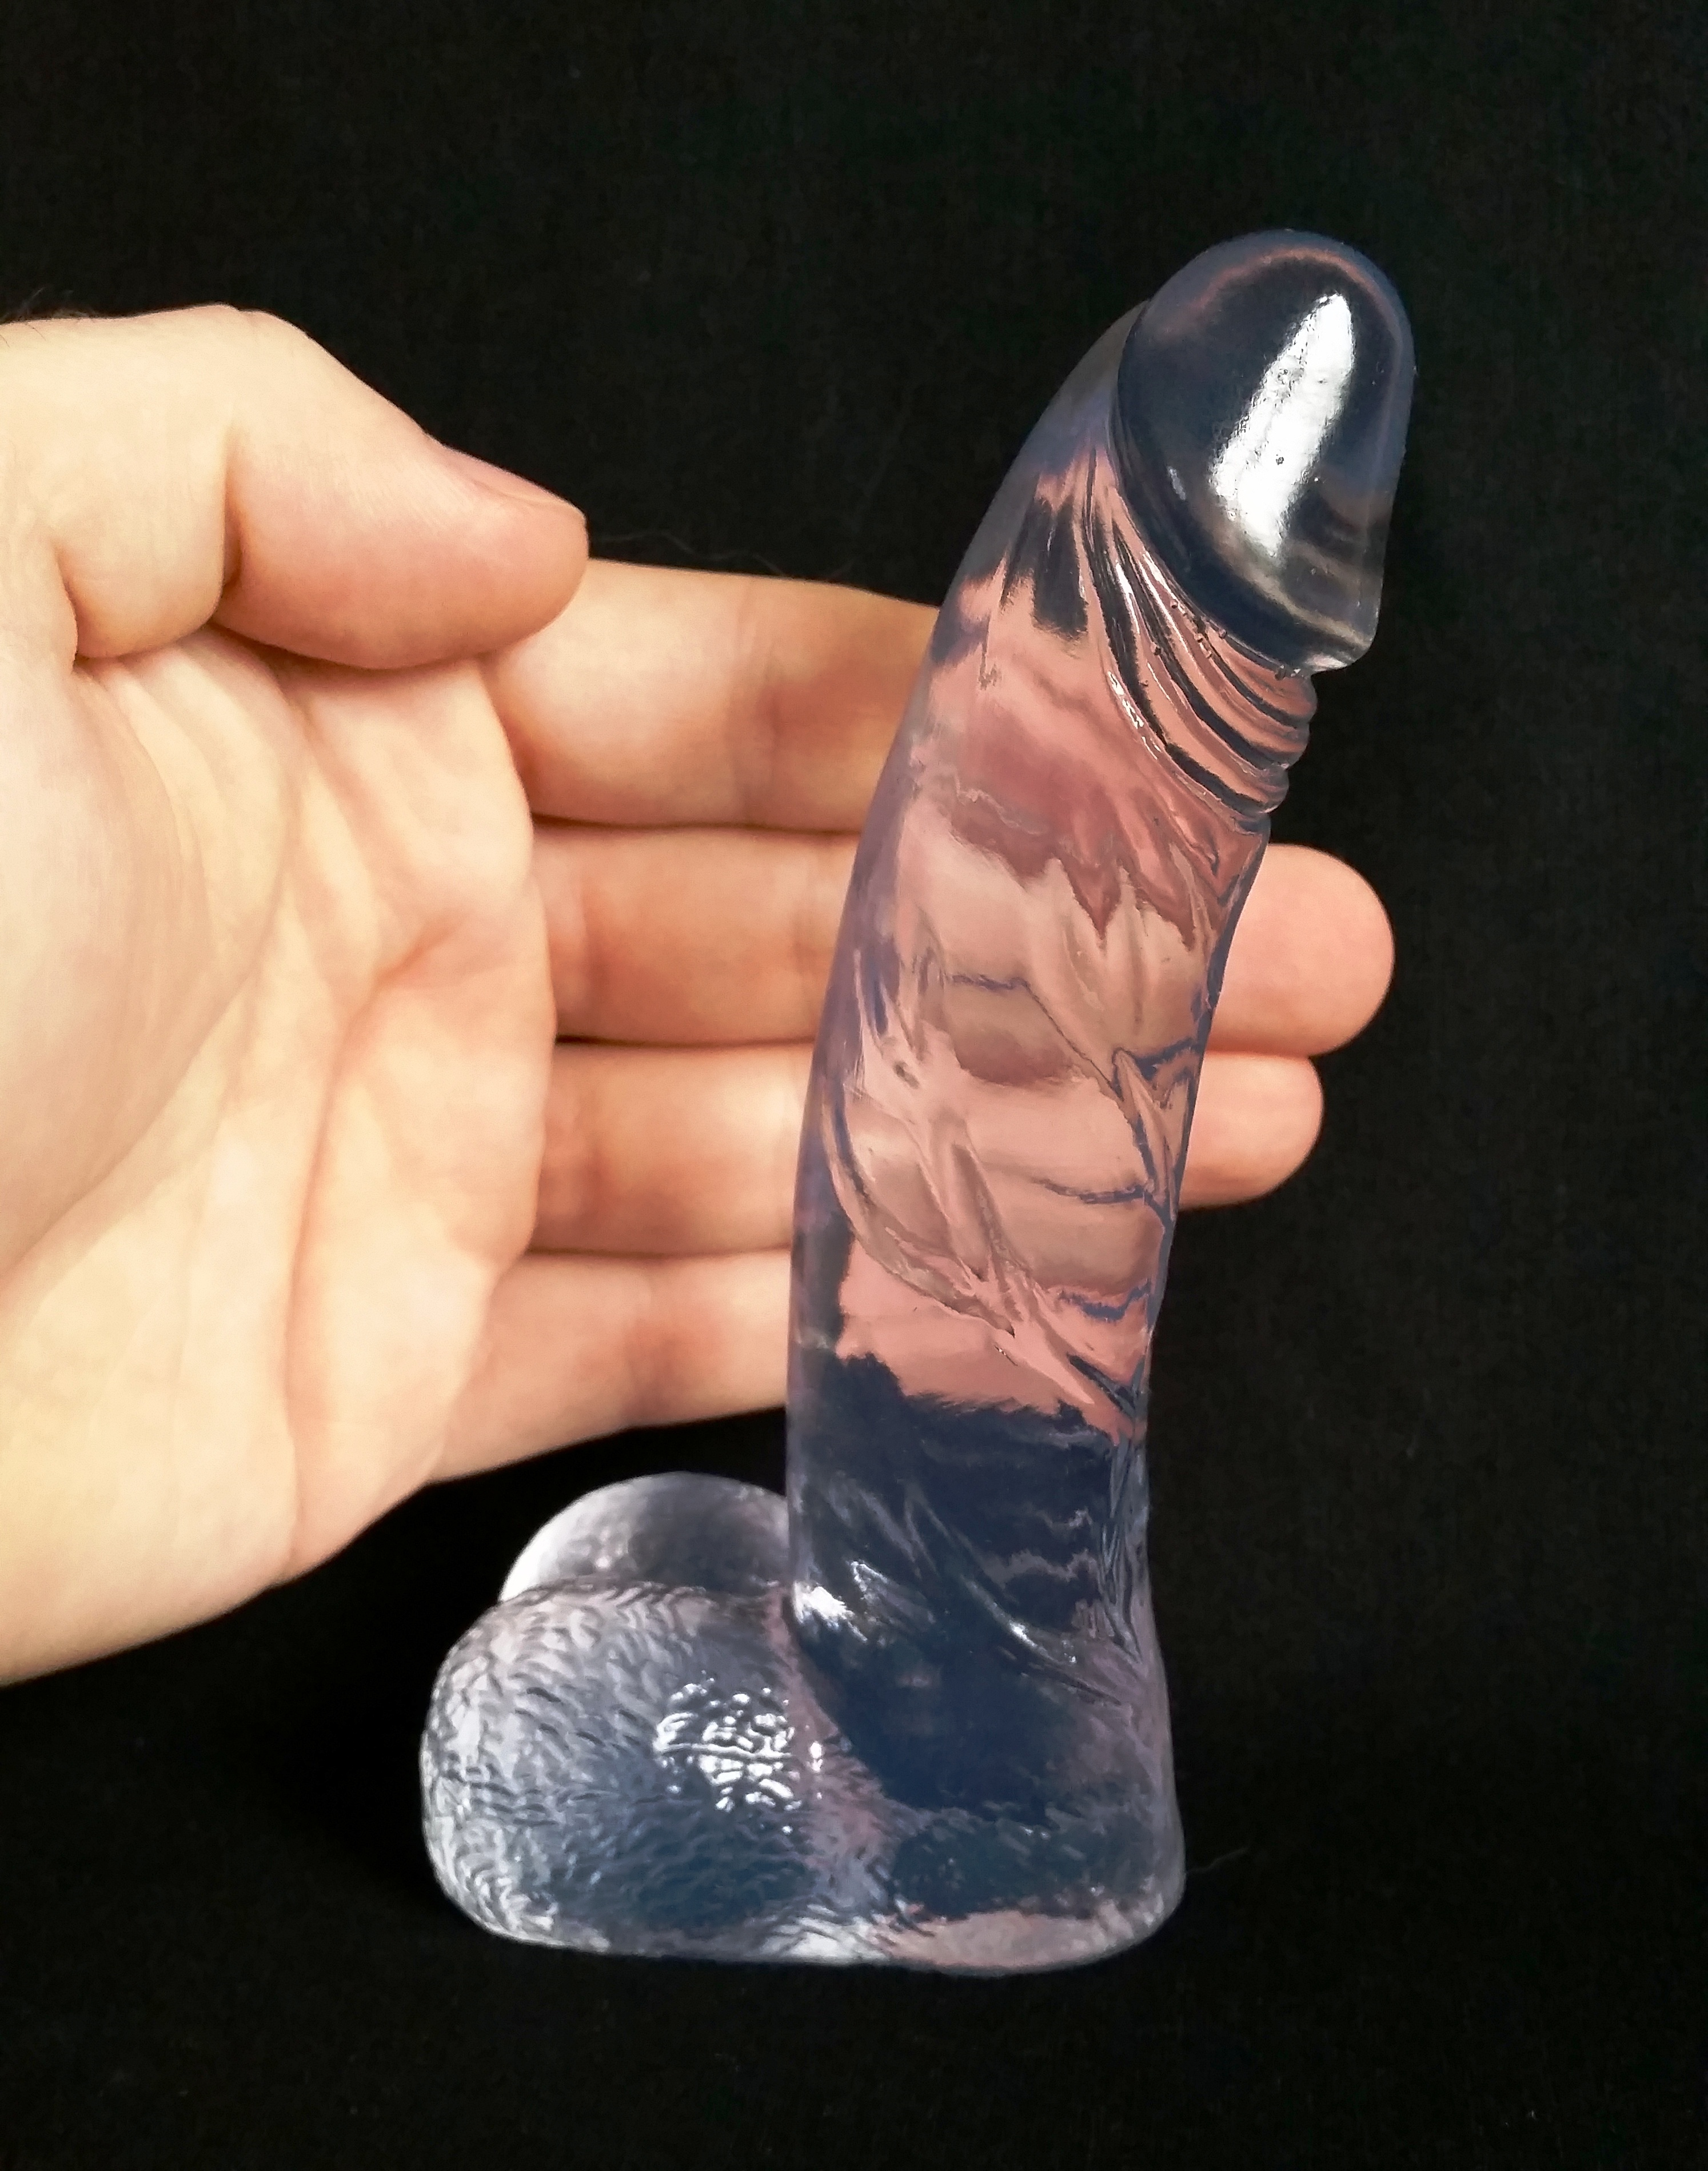 12 Inch Glass Dildo with snake